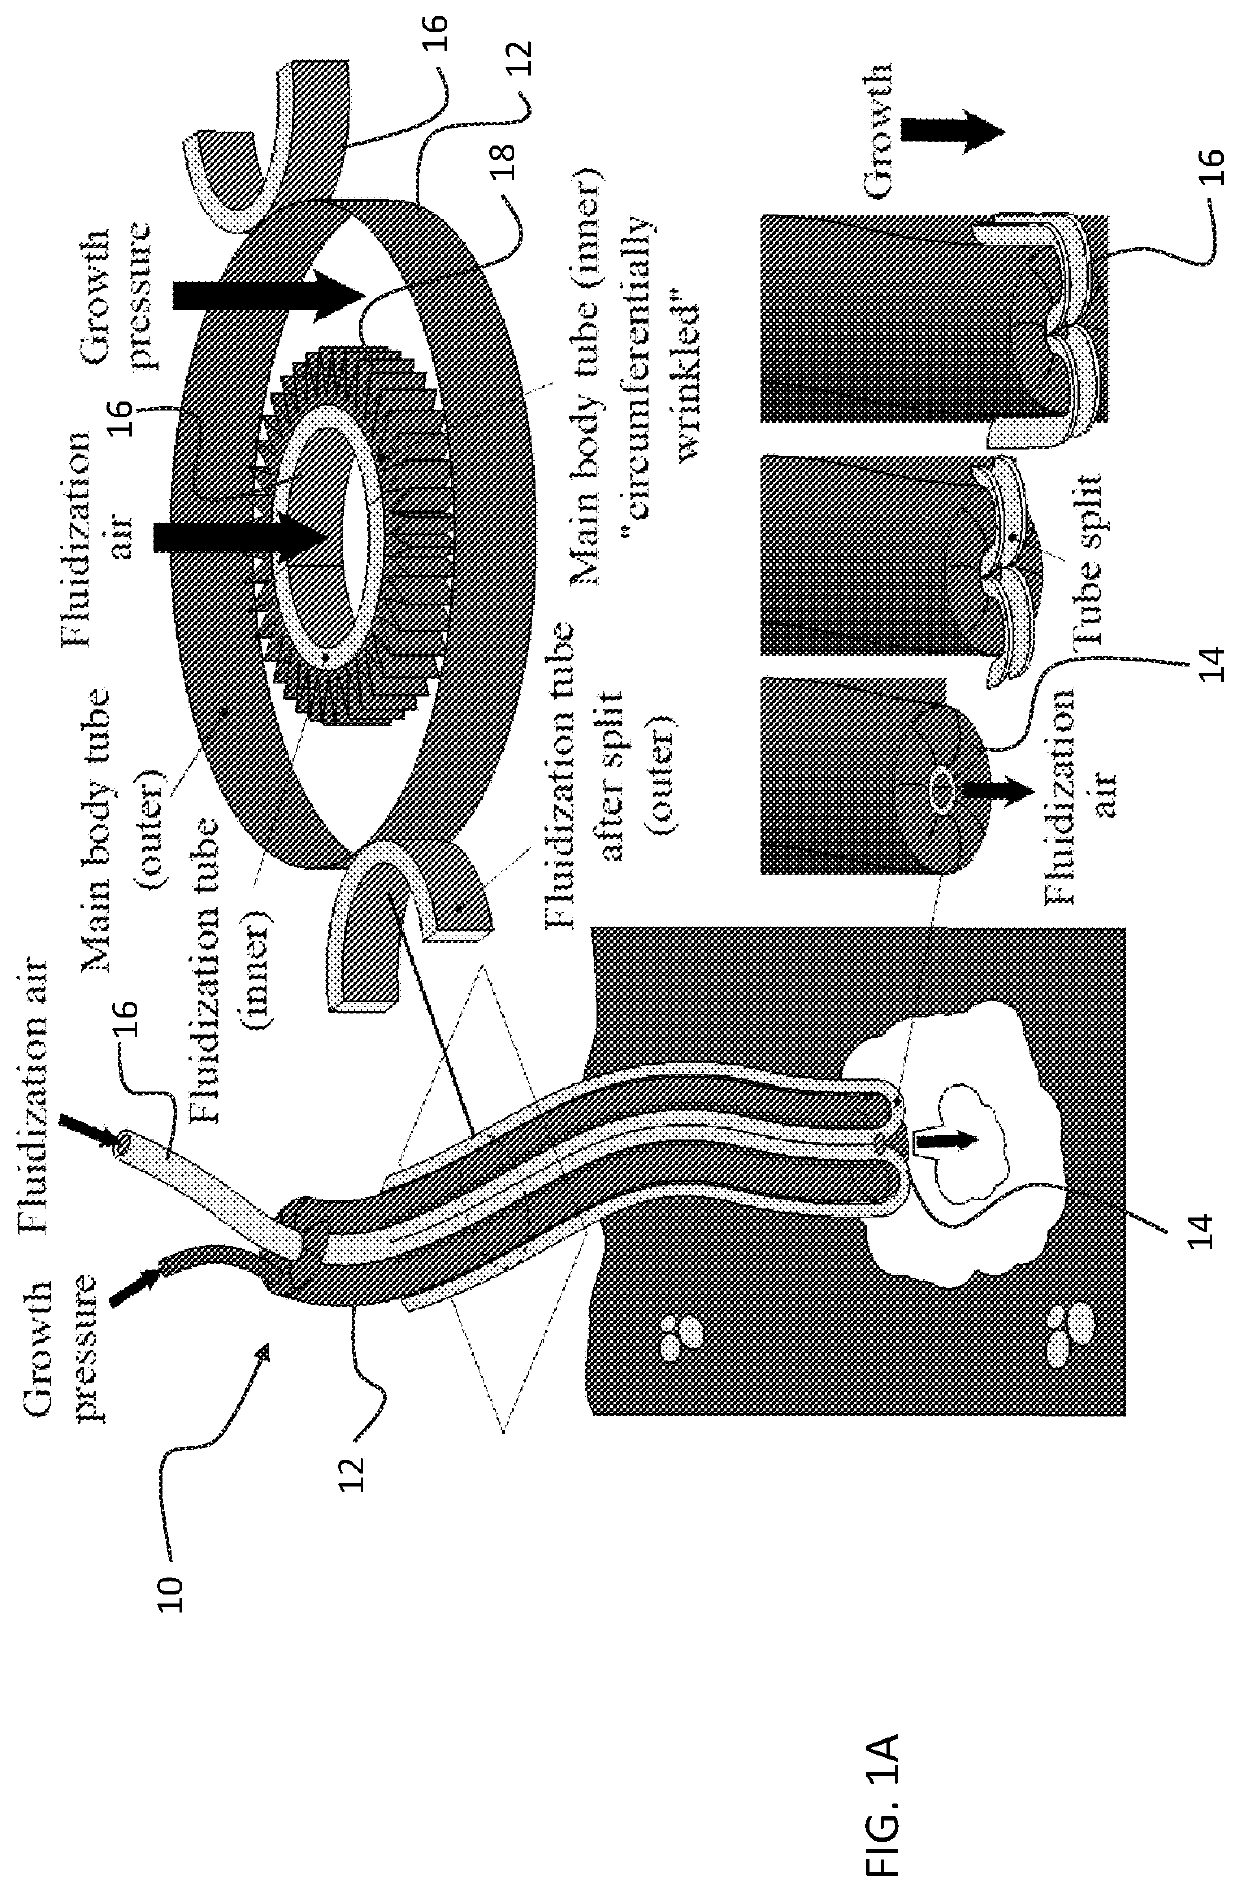 Soft robotic device with fluid emission for burrowing and cleaning